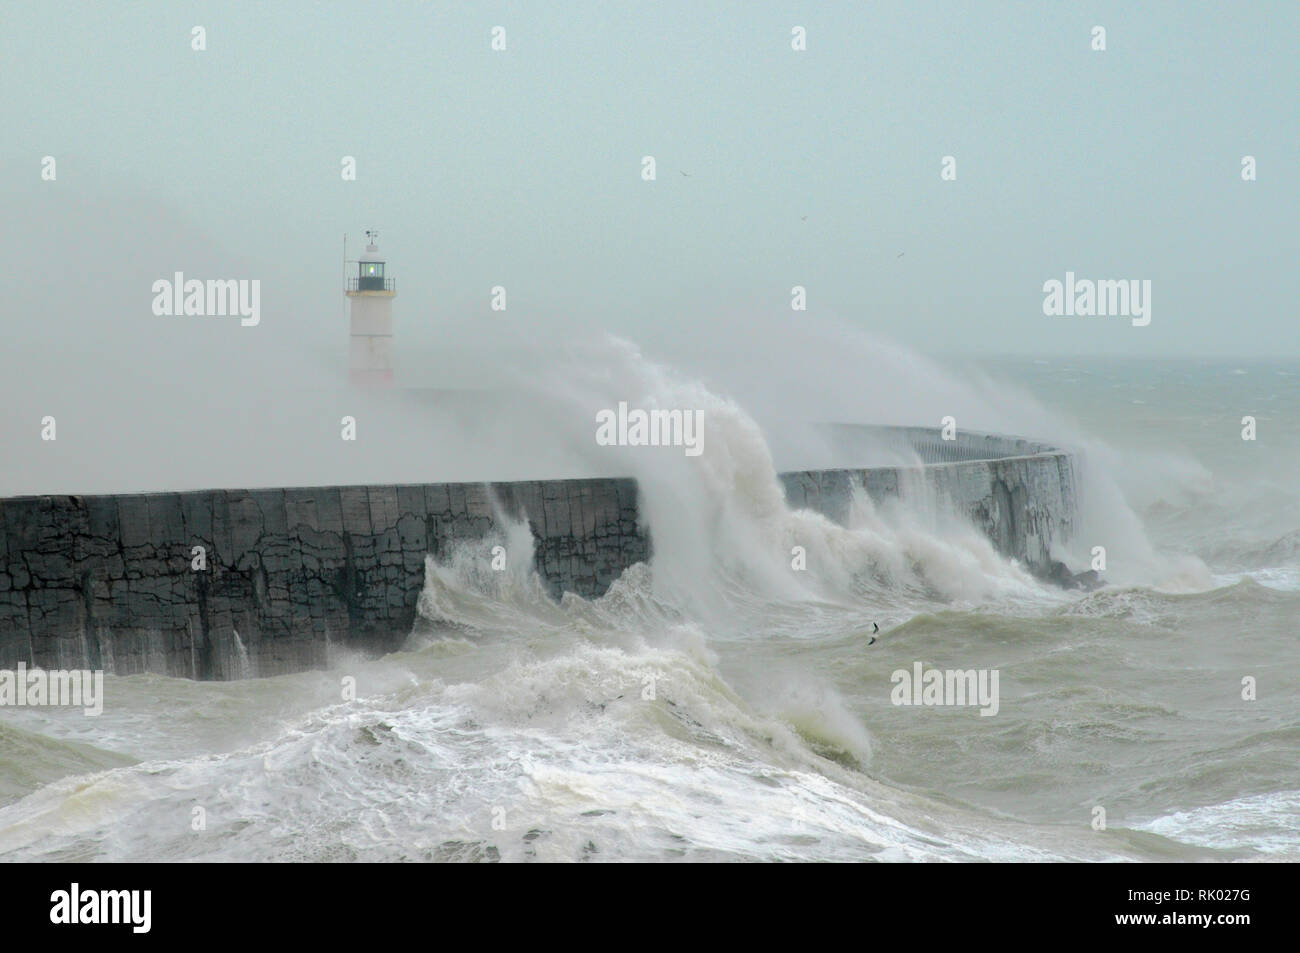 Newhaven, East Sussex, UK..8 February 2019. Storm Erik brings gale force winds whipping up the surf & creating big waves along the South coast. . Stock Photo